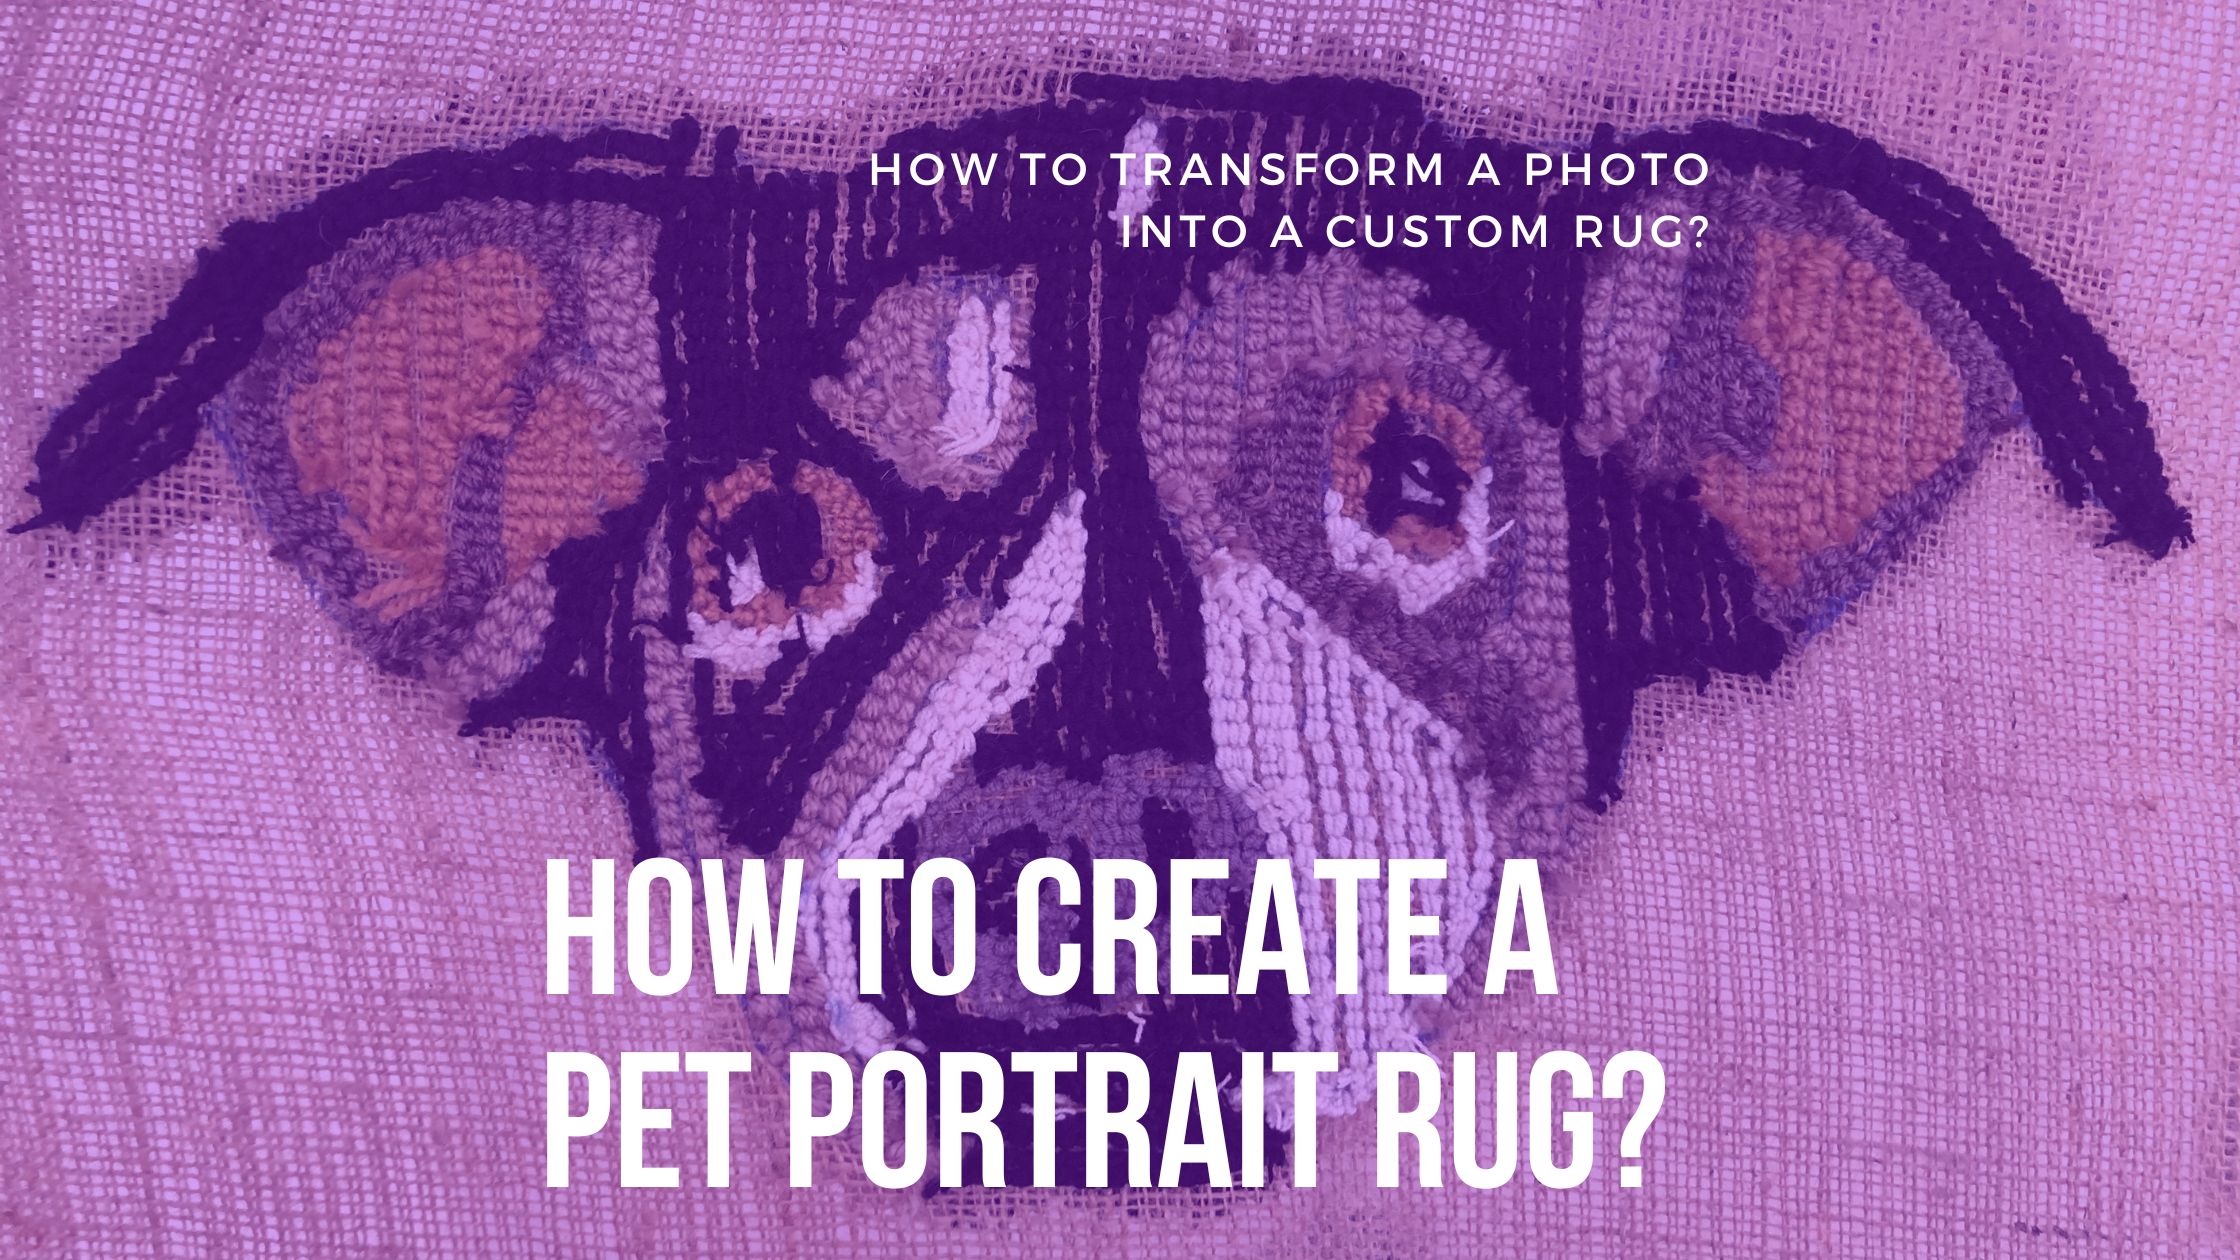 How To Create A Pet Portrait Rug?